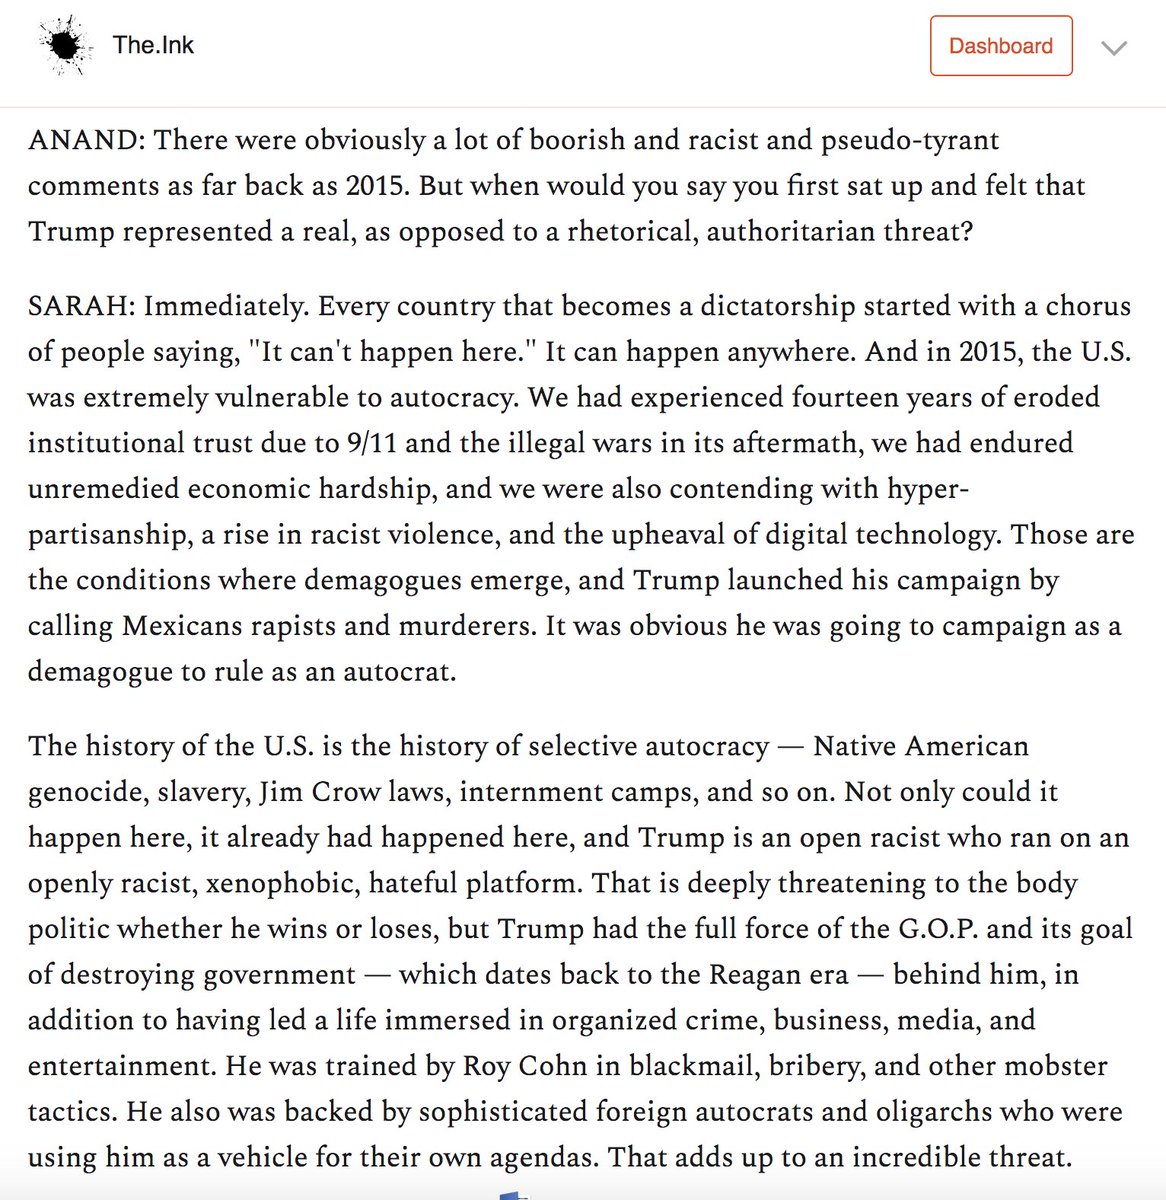 If you think back to 2015, there was a big debate, in which I grew enmeshed as well, about how early was too early to call Trump an autocrat. @sarahkendzior's view was clear. It was never too early, because "the history of the U.S. is the history of selective autocracy."